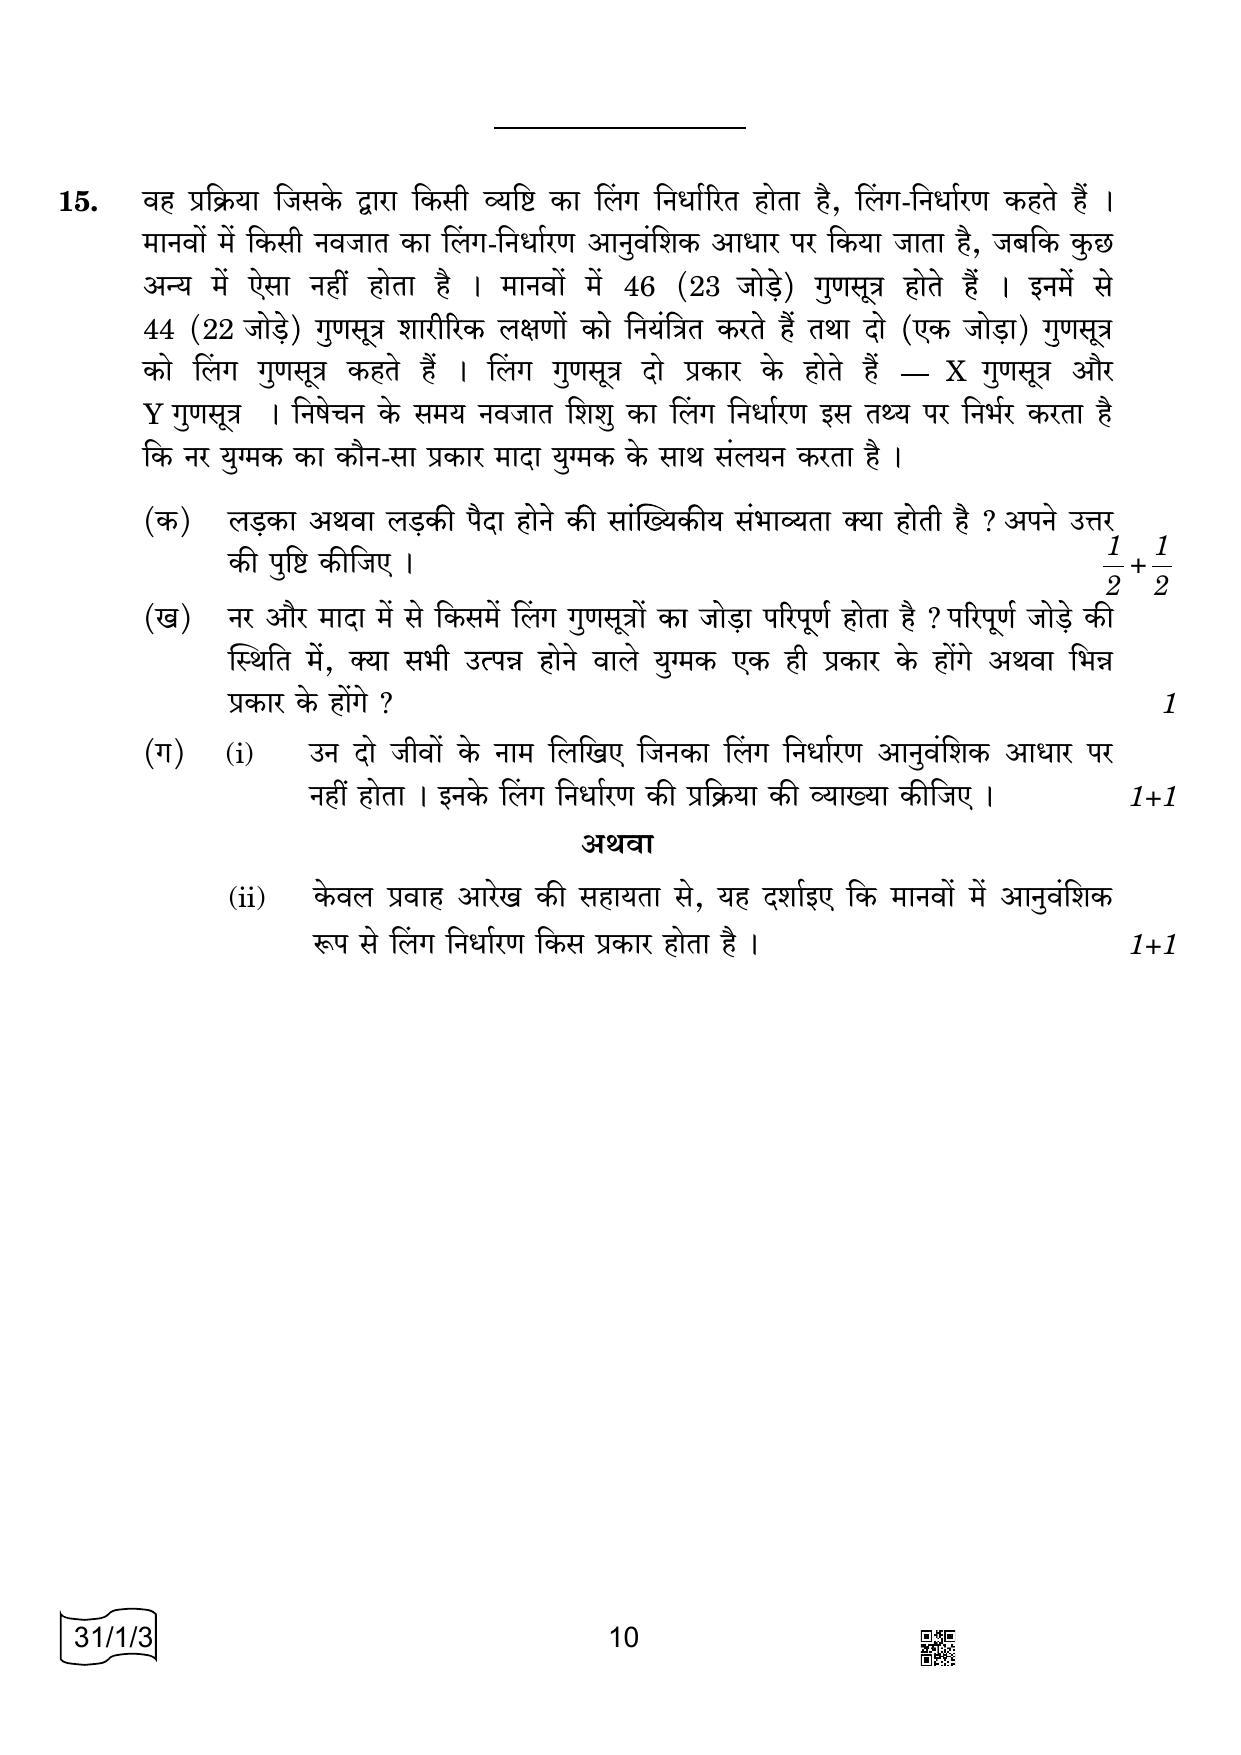 CBSE Class 10 31-1-3 Science 2022 Question Paper - Page 10